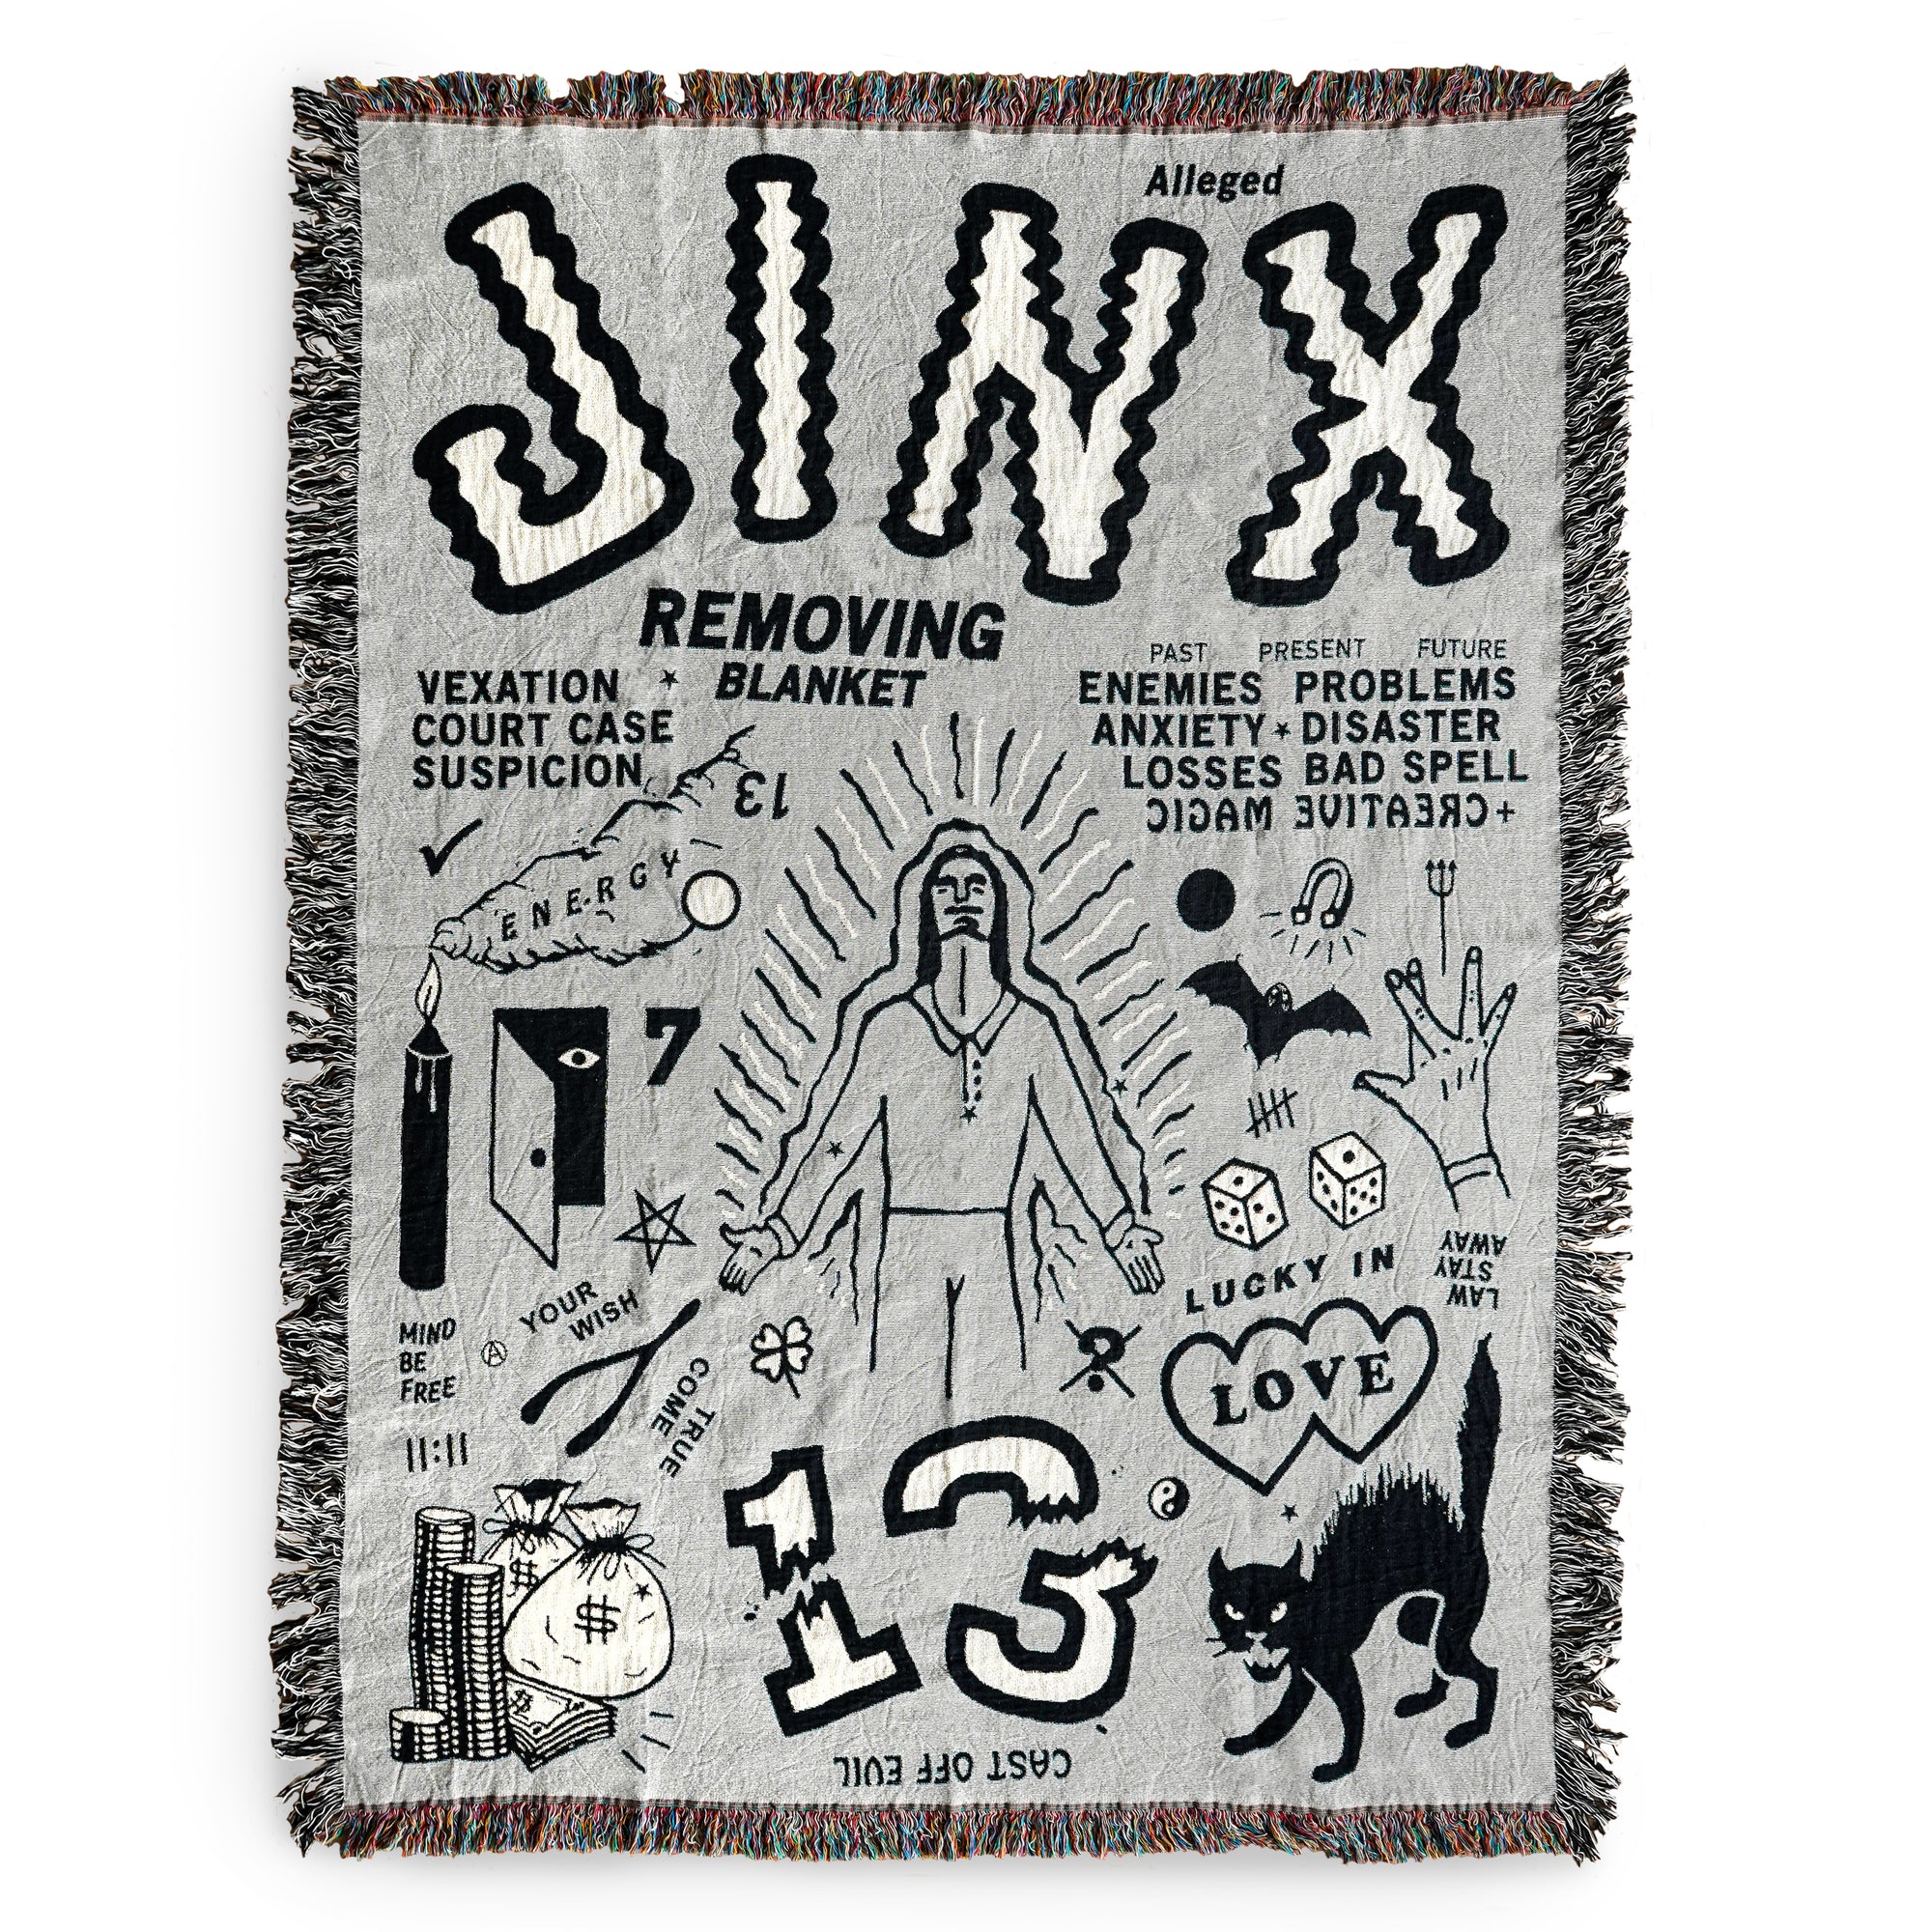 The "Alleged Jinx Removing" Woven Blanket.  The blanket is photographed against a white background.  The blanket features the word "Jinx" in large letters across the top.  The blanket also features many images including, but not limited to, a candle, a pile of money, a black cat, two hearts, crossed fingers, dice, wishbone, and a large "13".